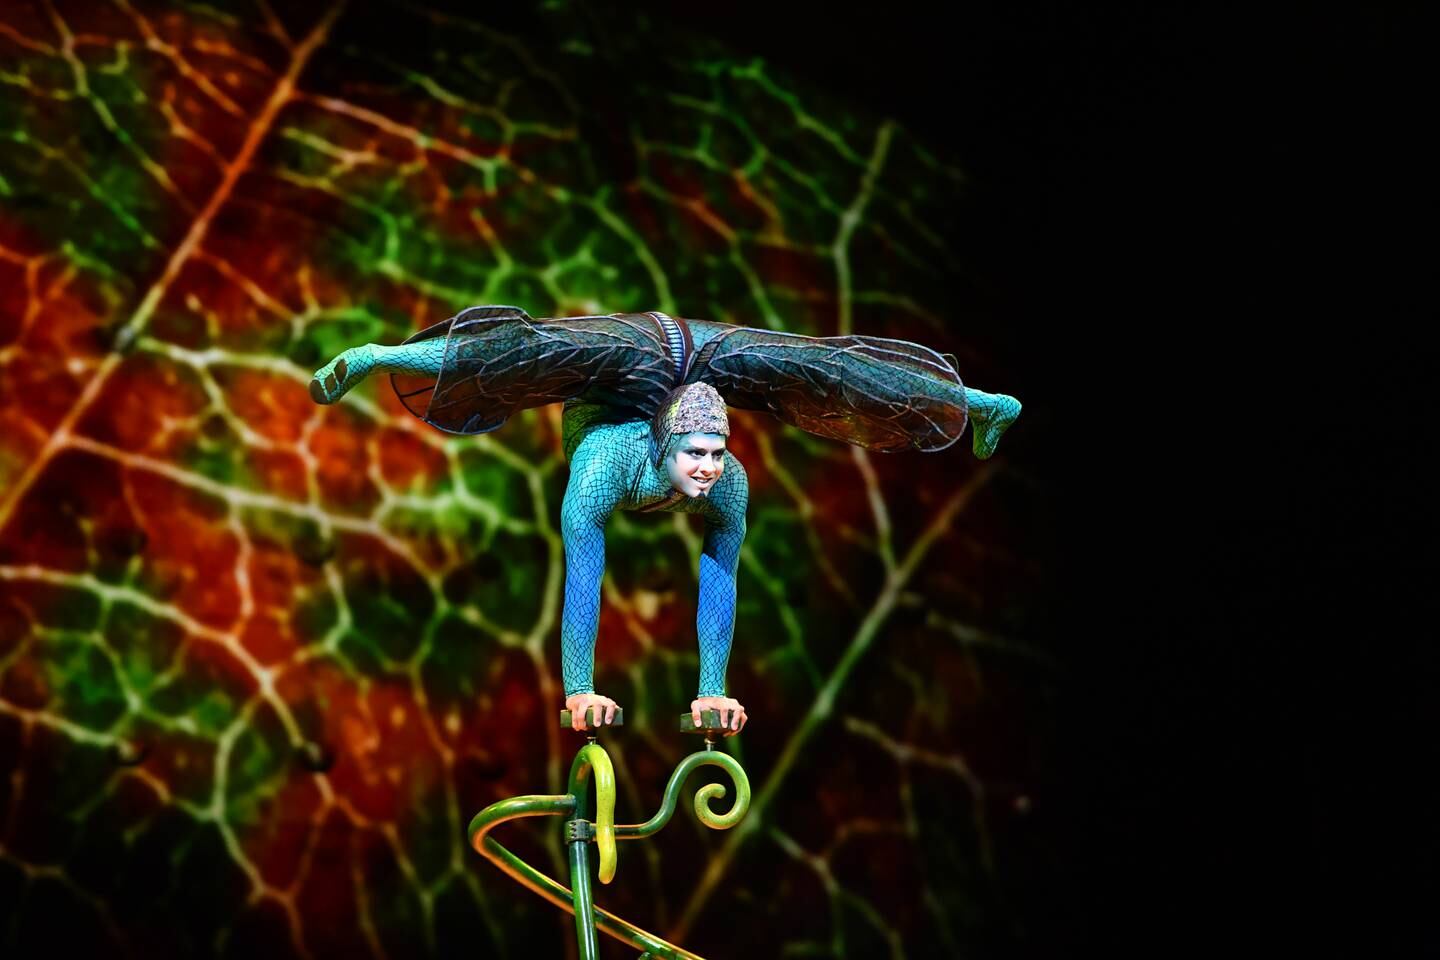 The show offers a surreal insight into the world of insects. Photo: Cirque du Soleil